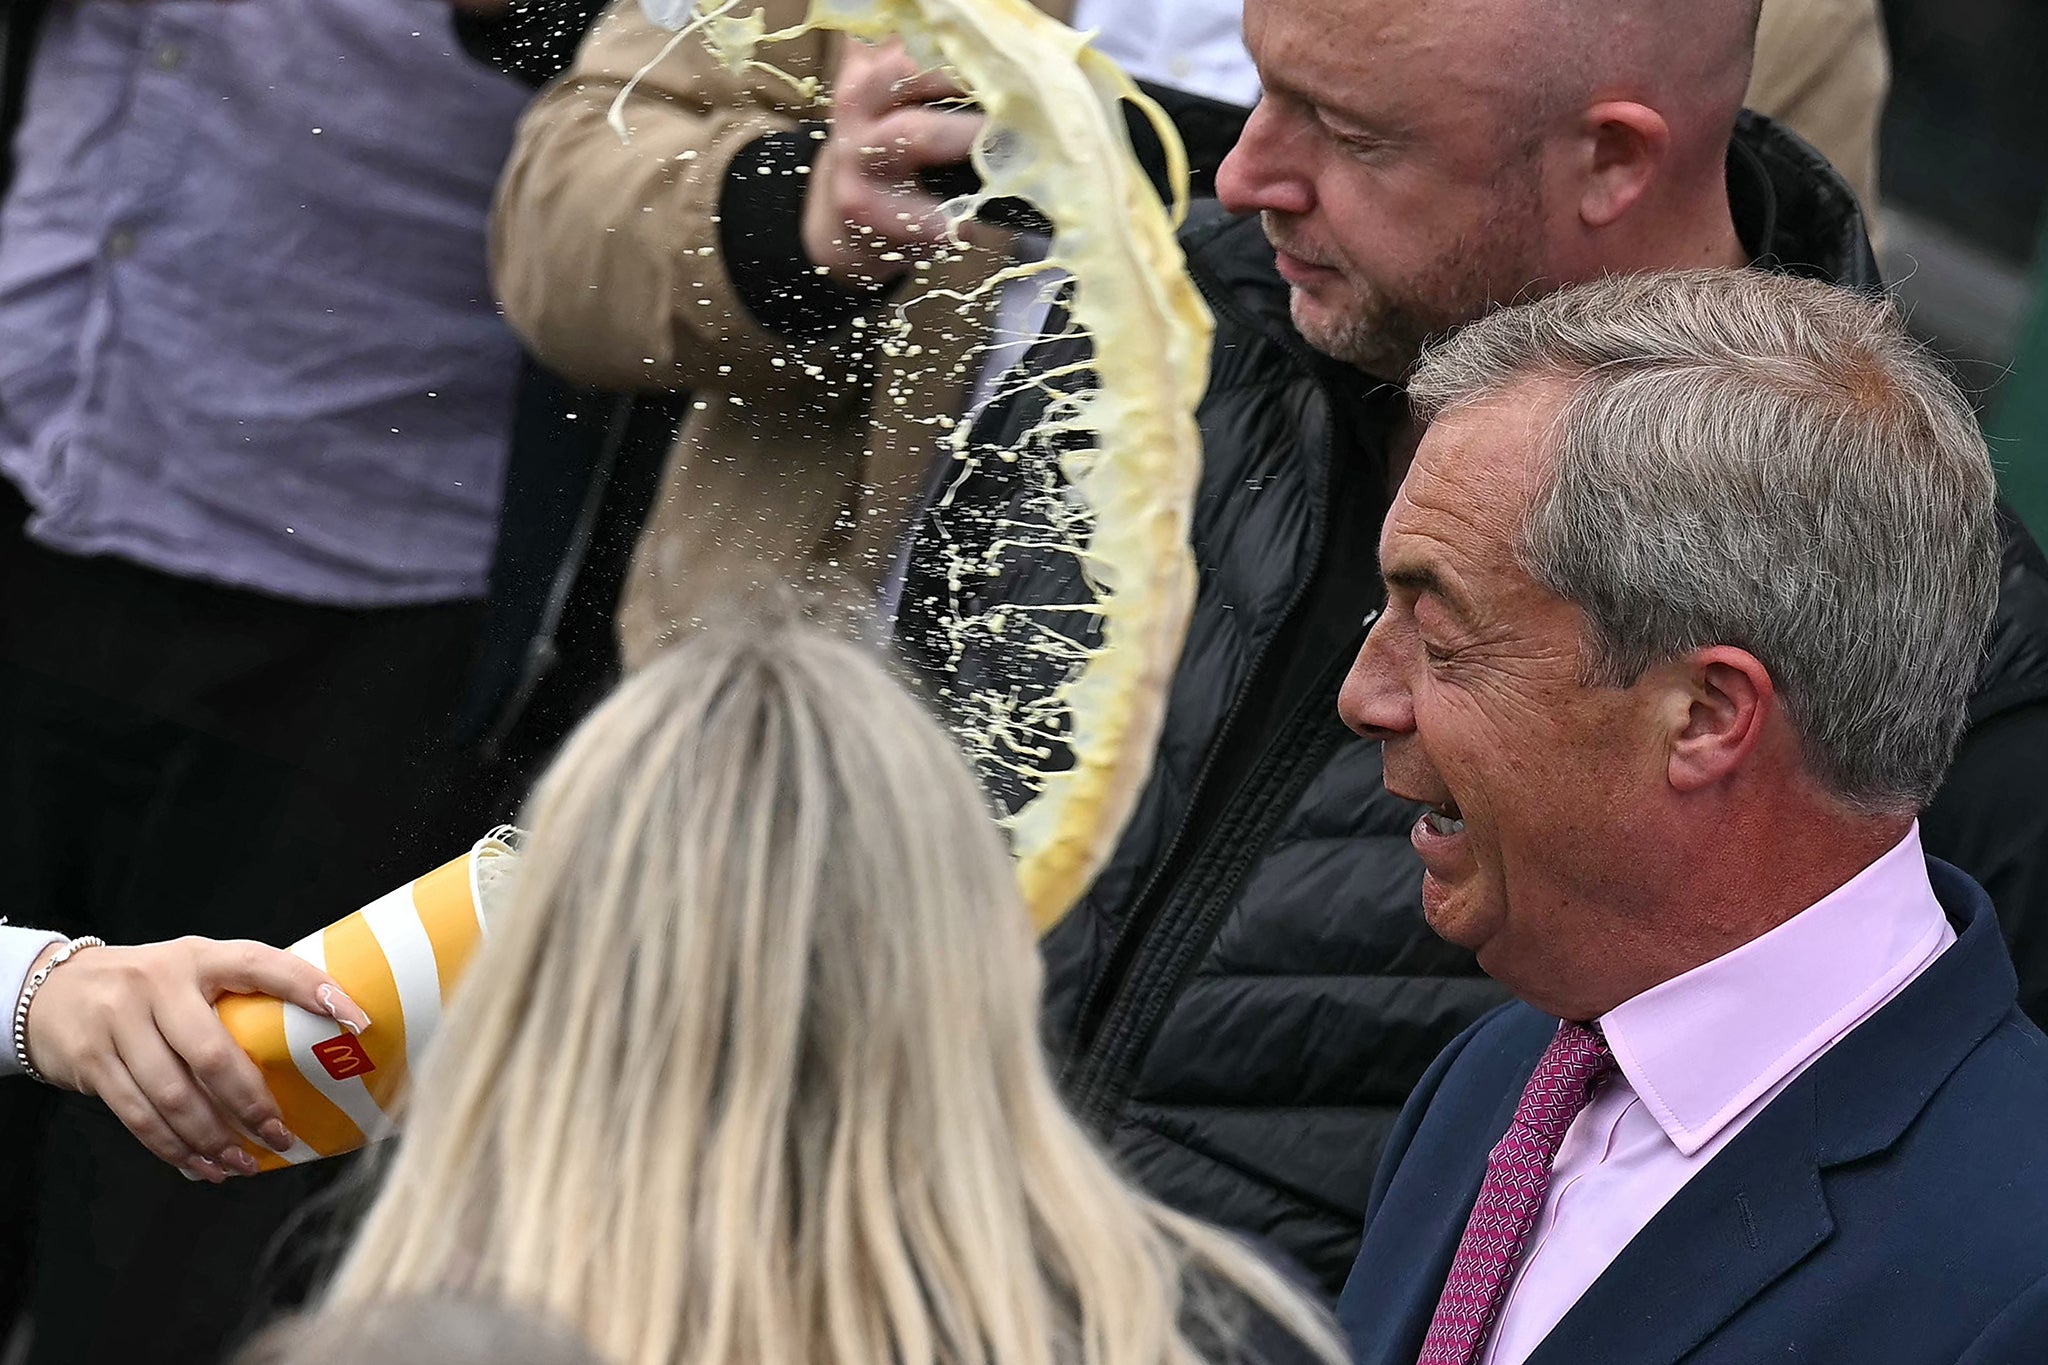 No matter what you think of Nigel Farage, the reality is that it is assault, plain and simple